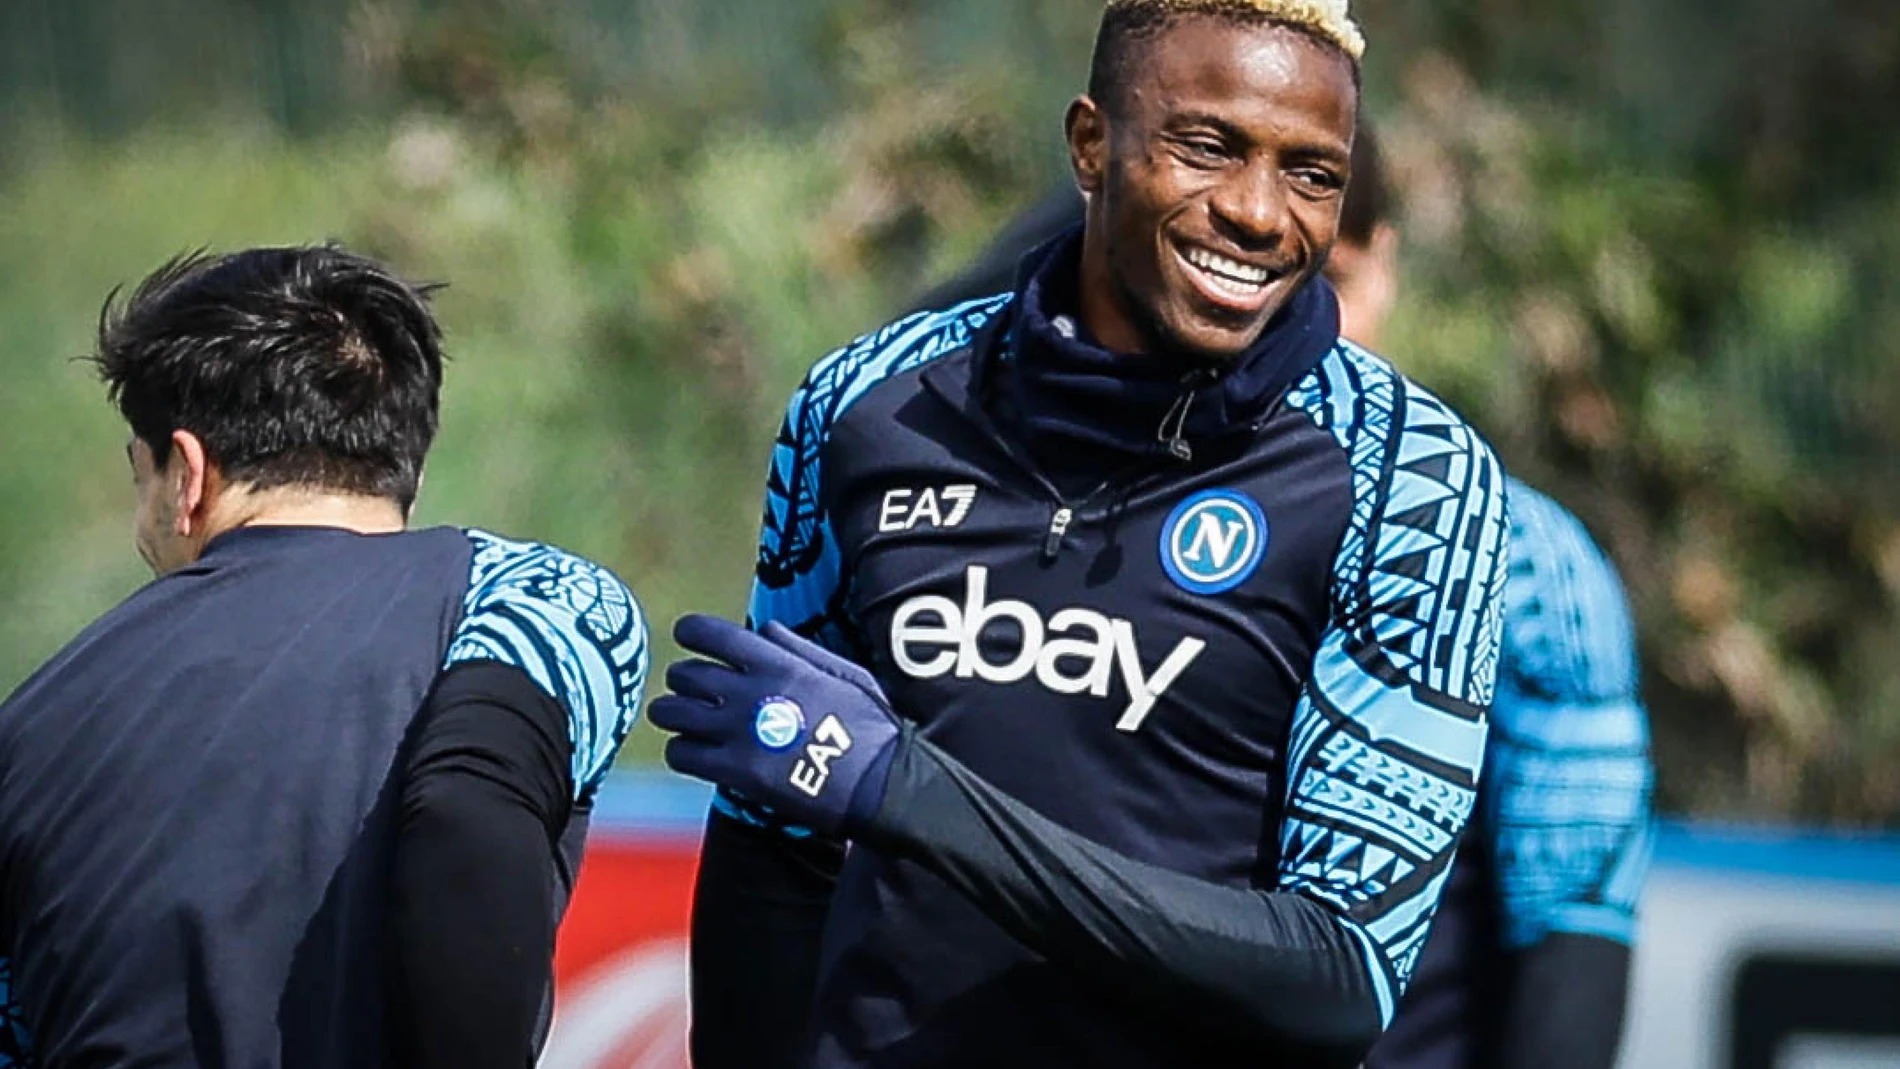 Napoli (Italy), 11/03/2024.- Napoli'Äôs forward Victor Osimhen attends a team training session in Castel Volturno, Italy, 11 March 2024. SSC Napoli will face FC Barcelona in their UEFA Champions League Round of 16, second leg match on 12 March 2024. (Liga de Campeones, Italia) EFE/EPA/CESARE ABBATE 